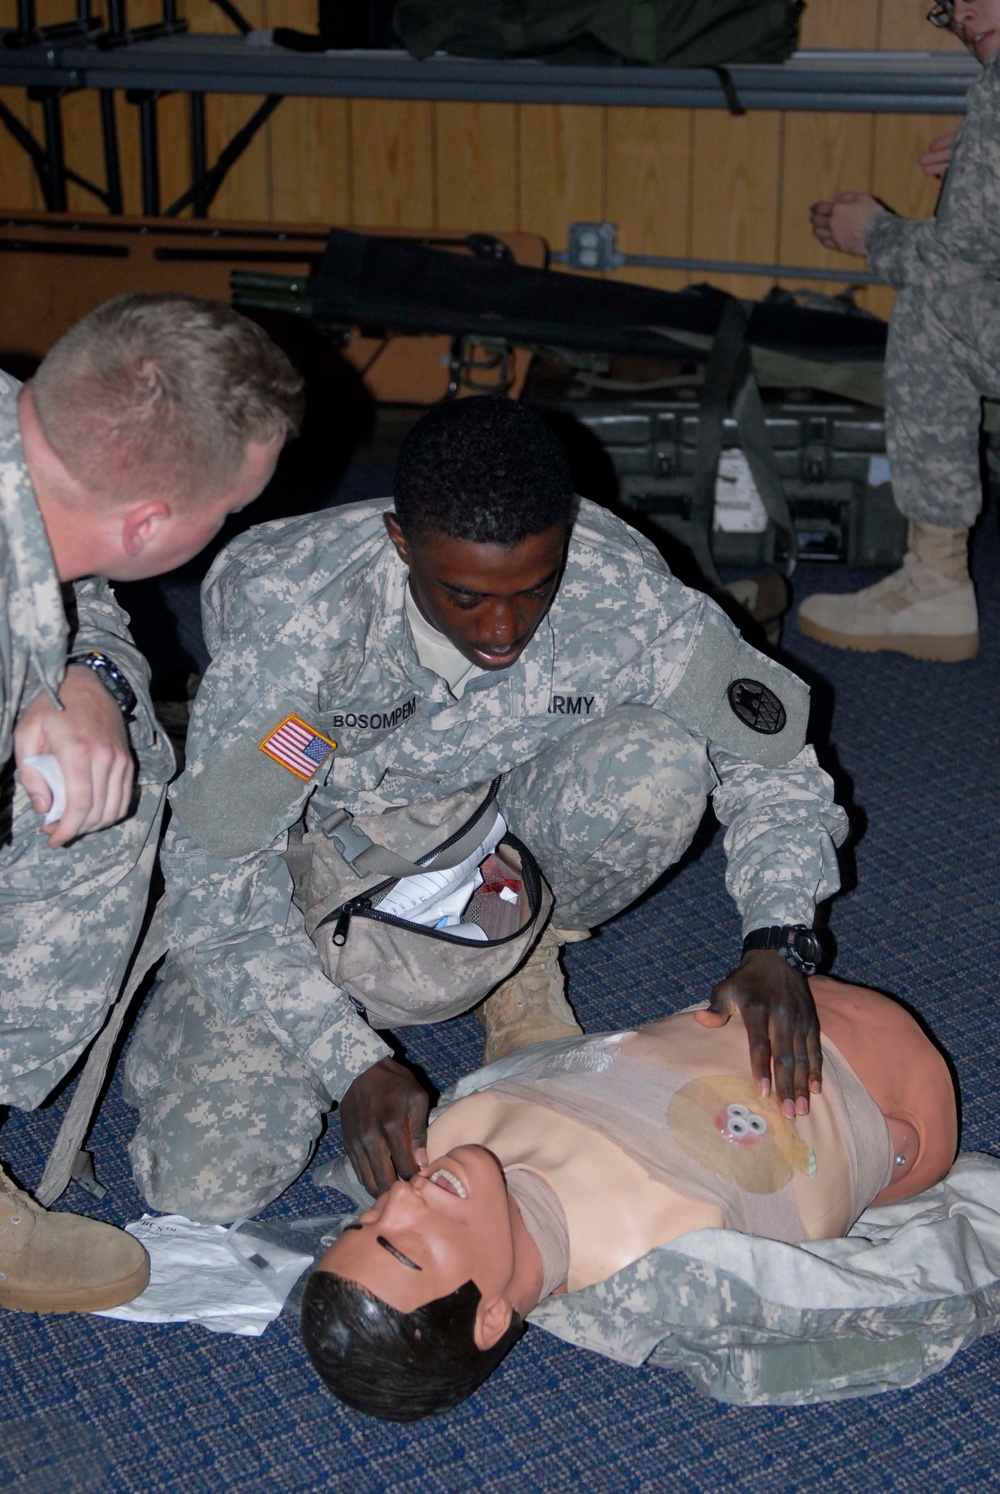 Medically speaking: 130th MEB Soldiers Tourni-quet Up